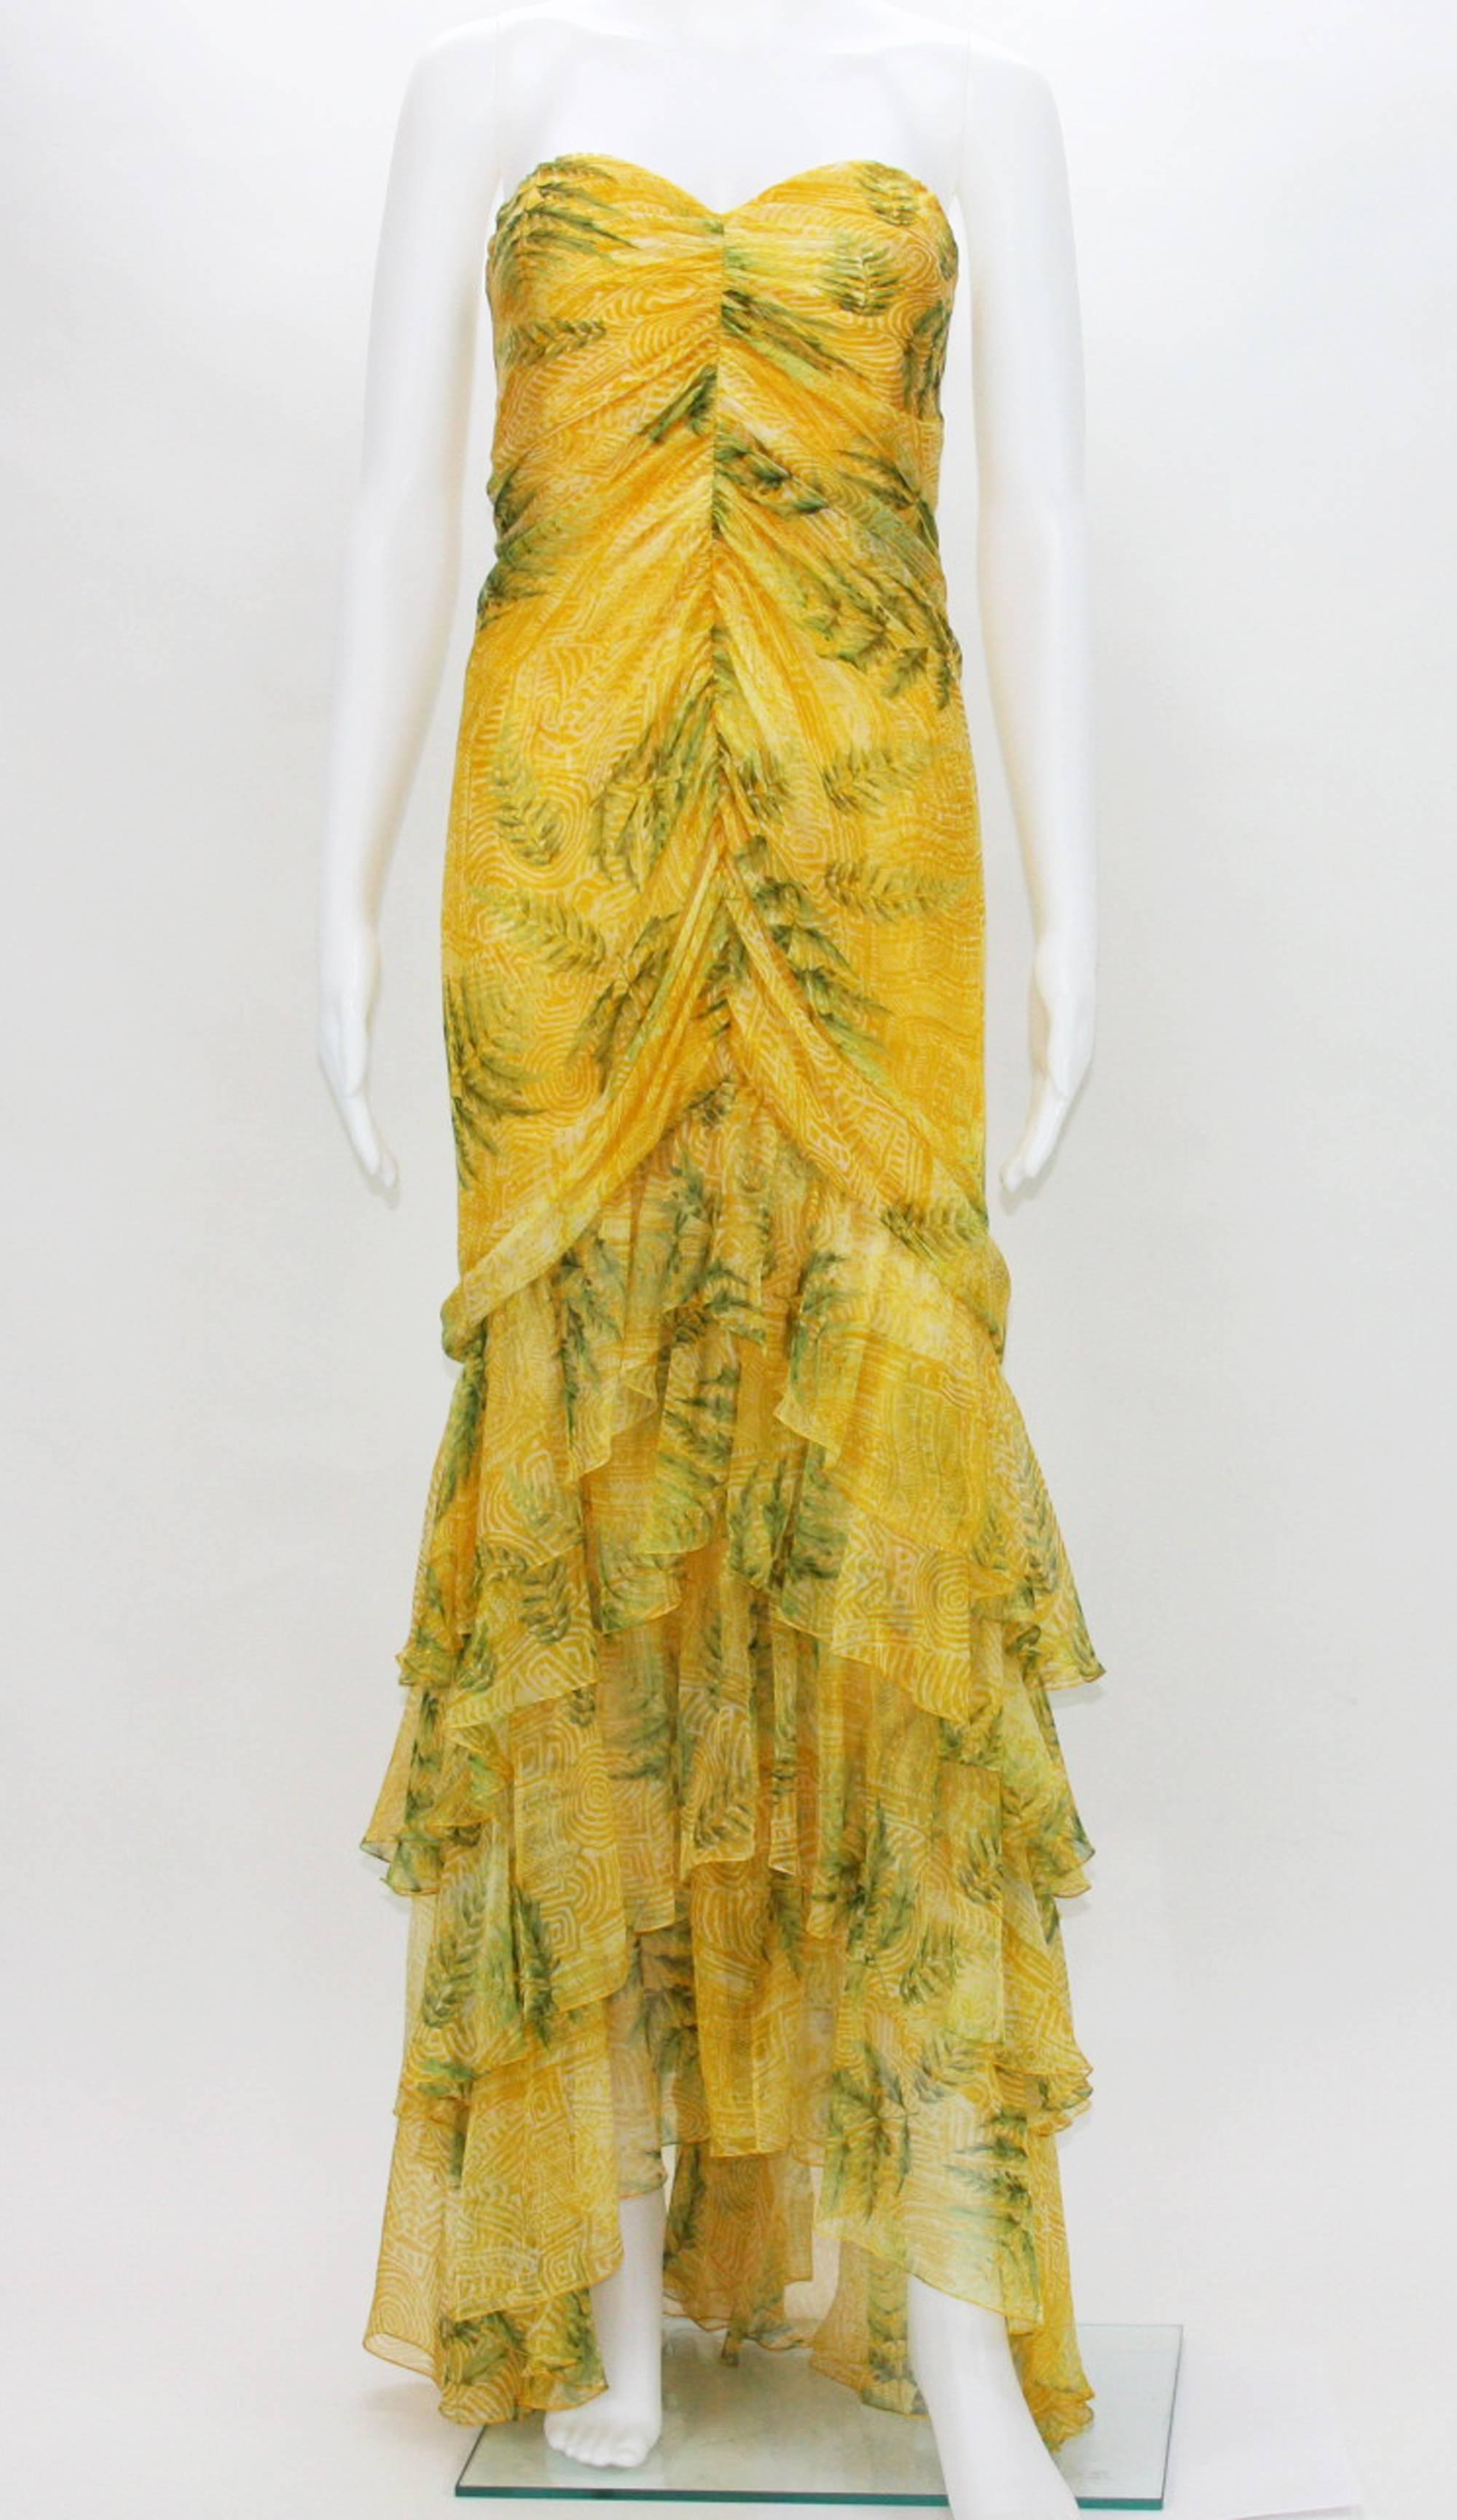 New Oscar De La Renta Long Dress Gown
S/S 2004 Collection
Designer size 8
100% Silk, Yellow back ground with White and Green Leave Pattern.
Sweetheart Neckline, Internal Bustier with Boning, Back Zip Closure, Padded Cups, Fabric Gathering at Front,